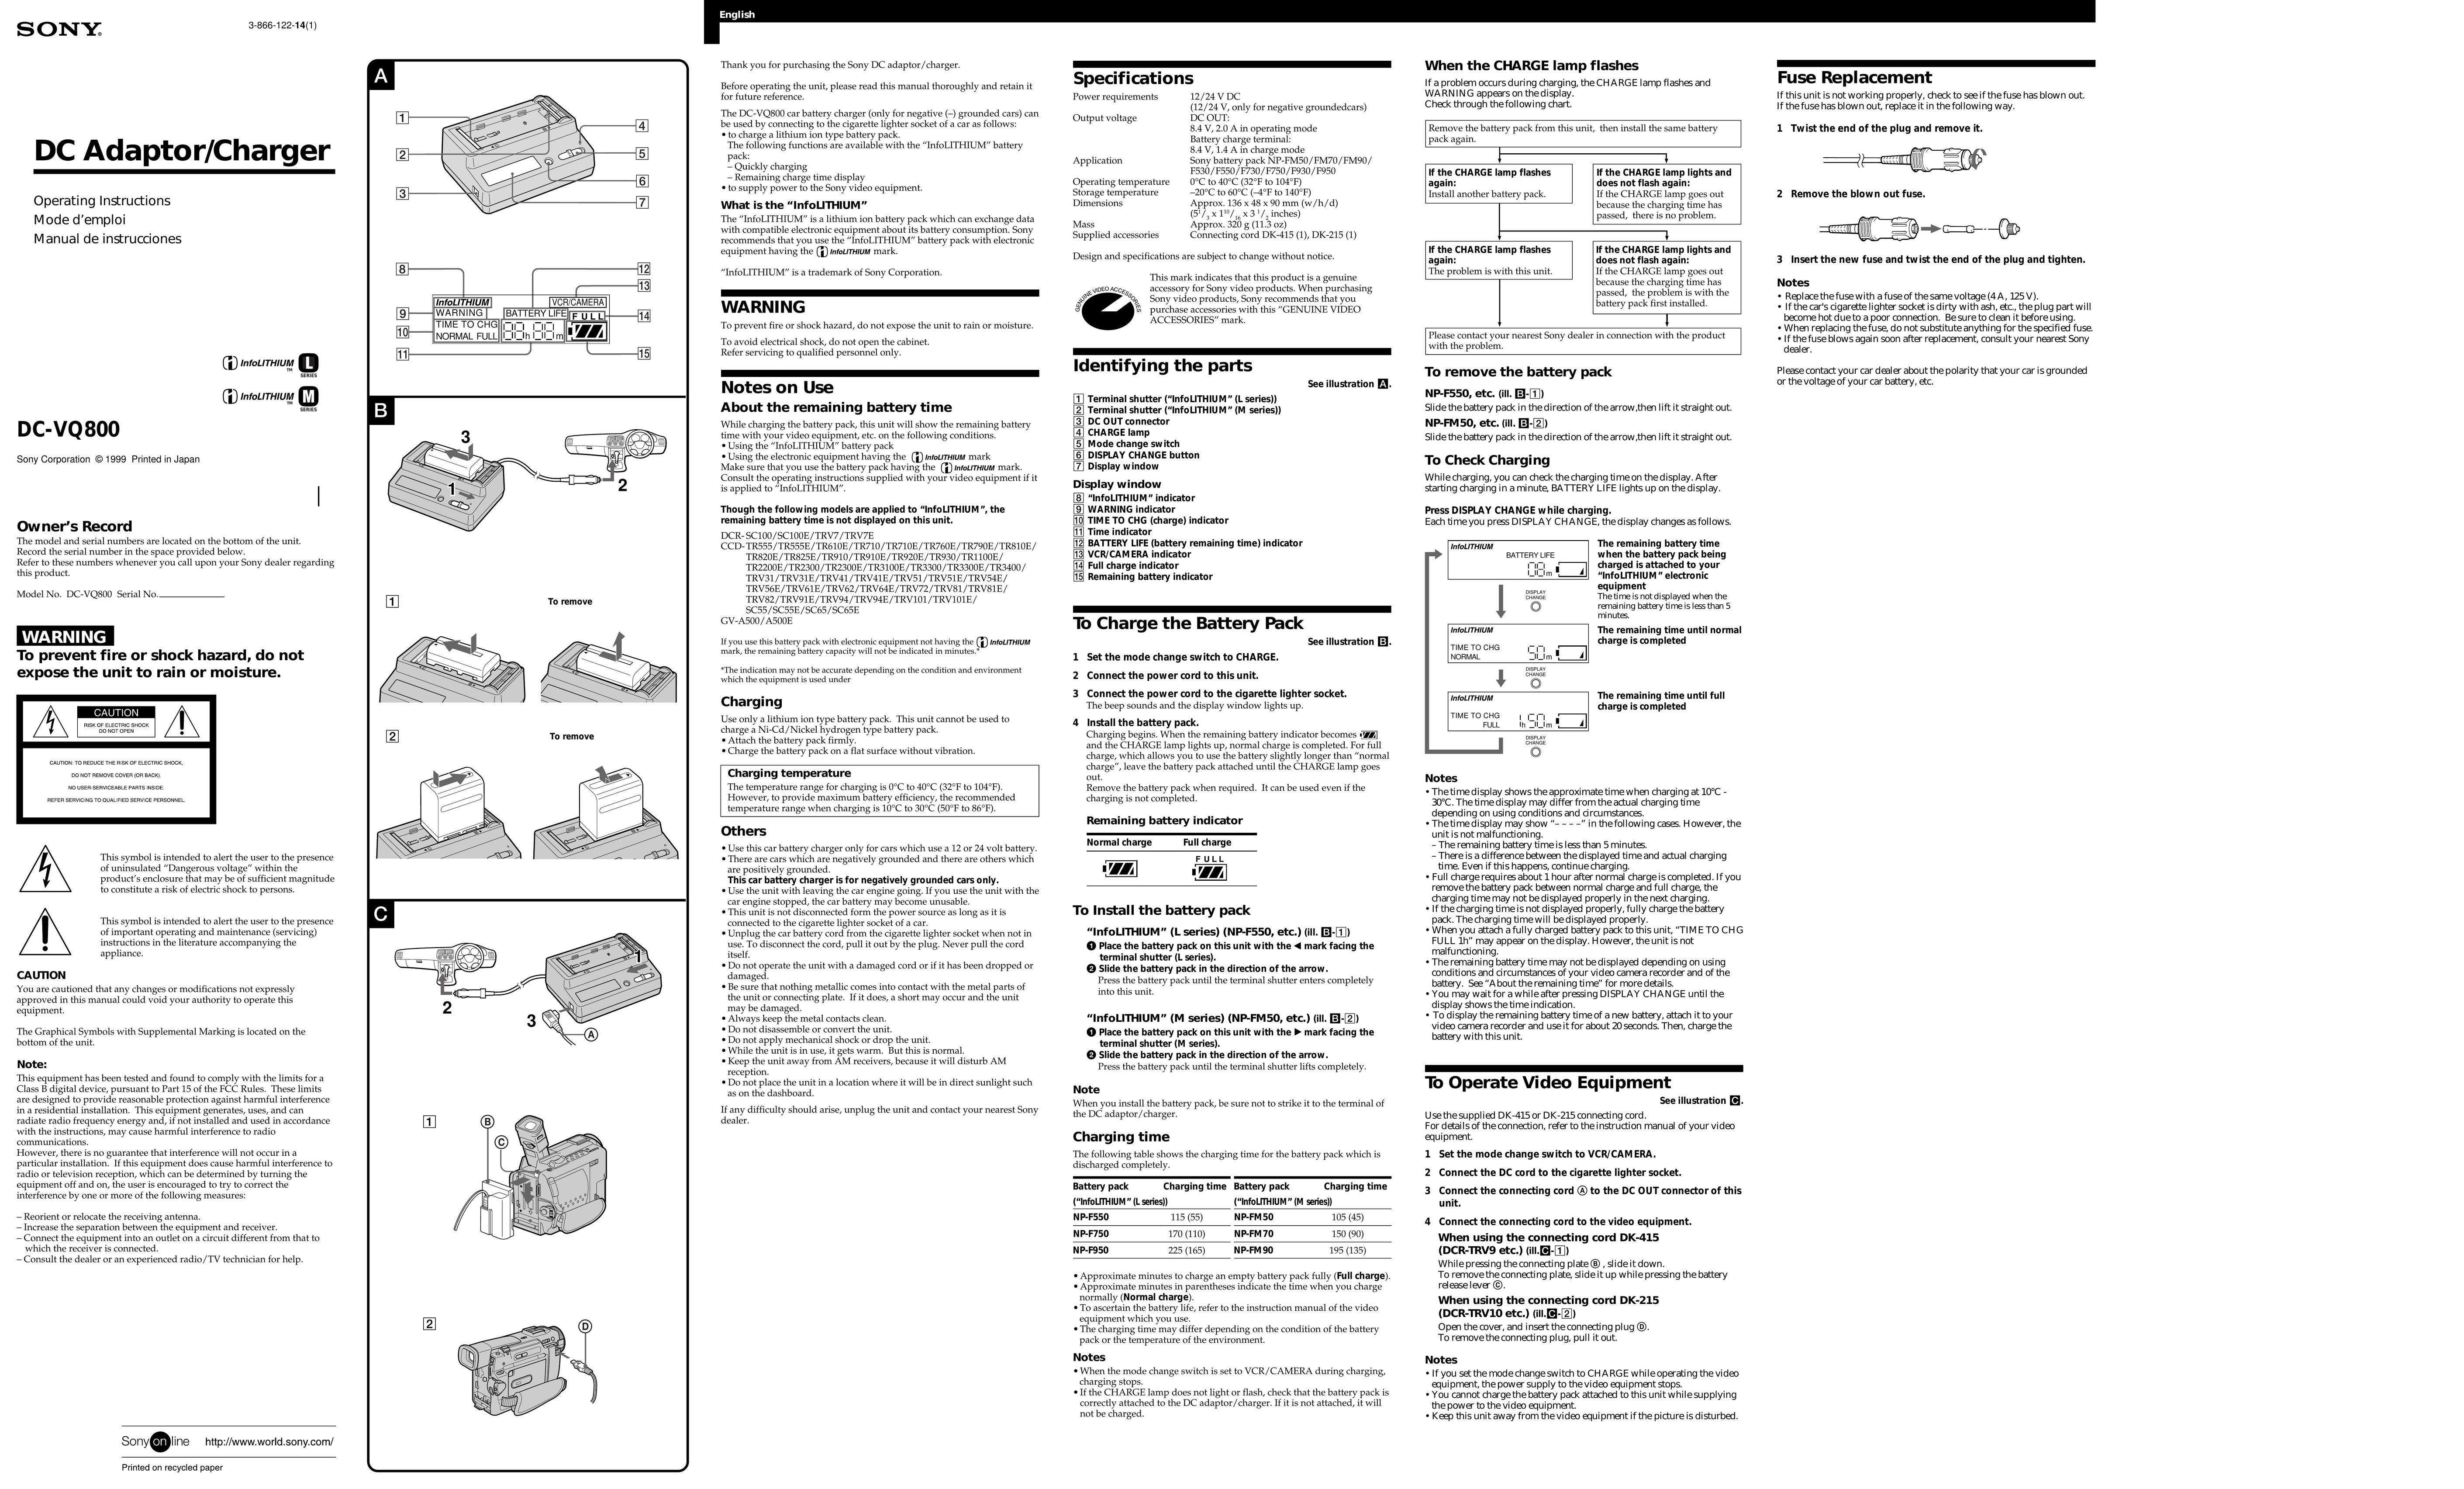 Sony DC-VQ800 Battery Charger User Manual